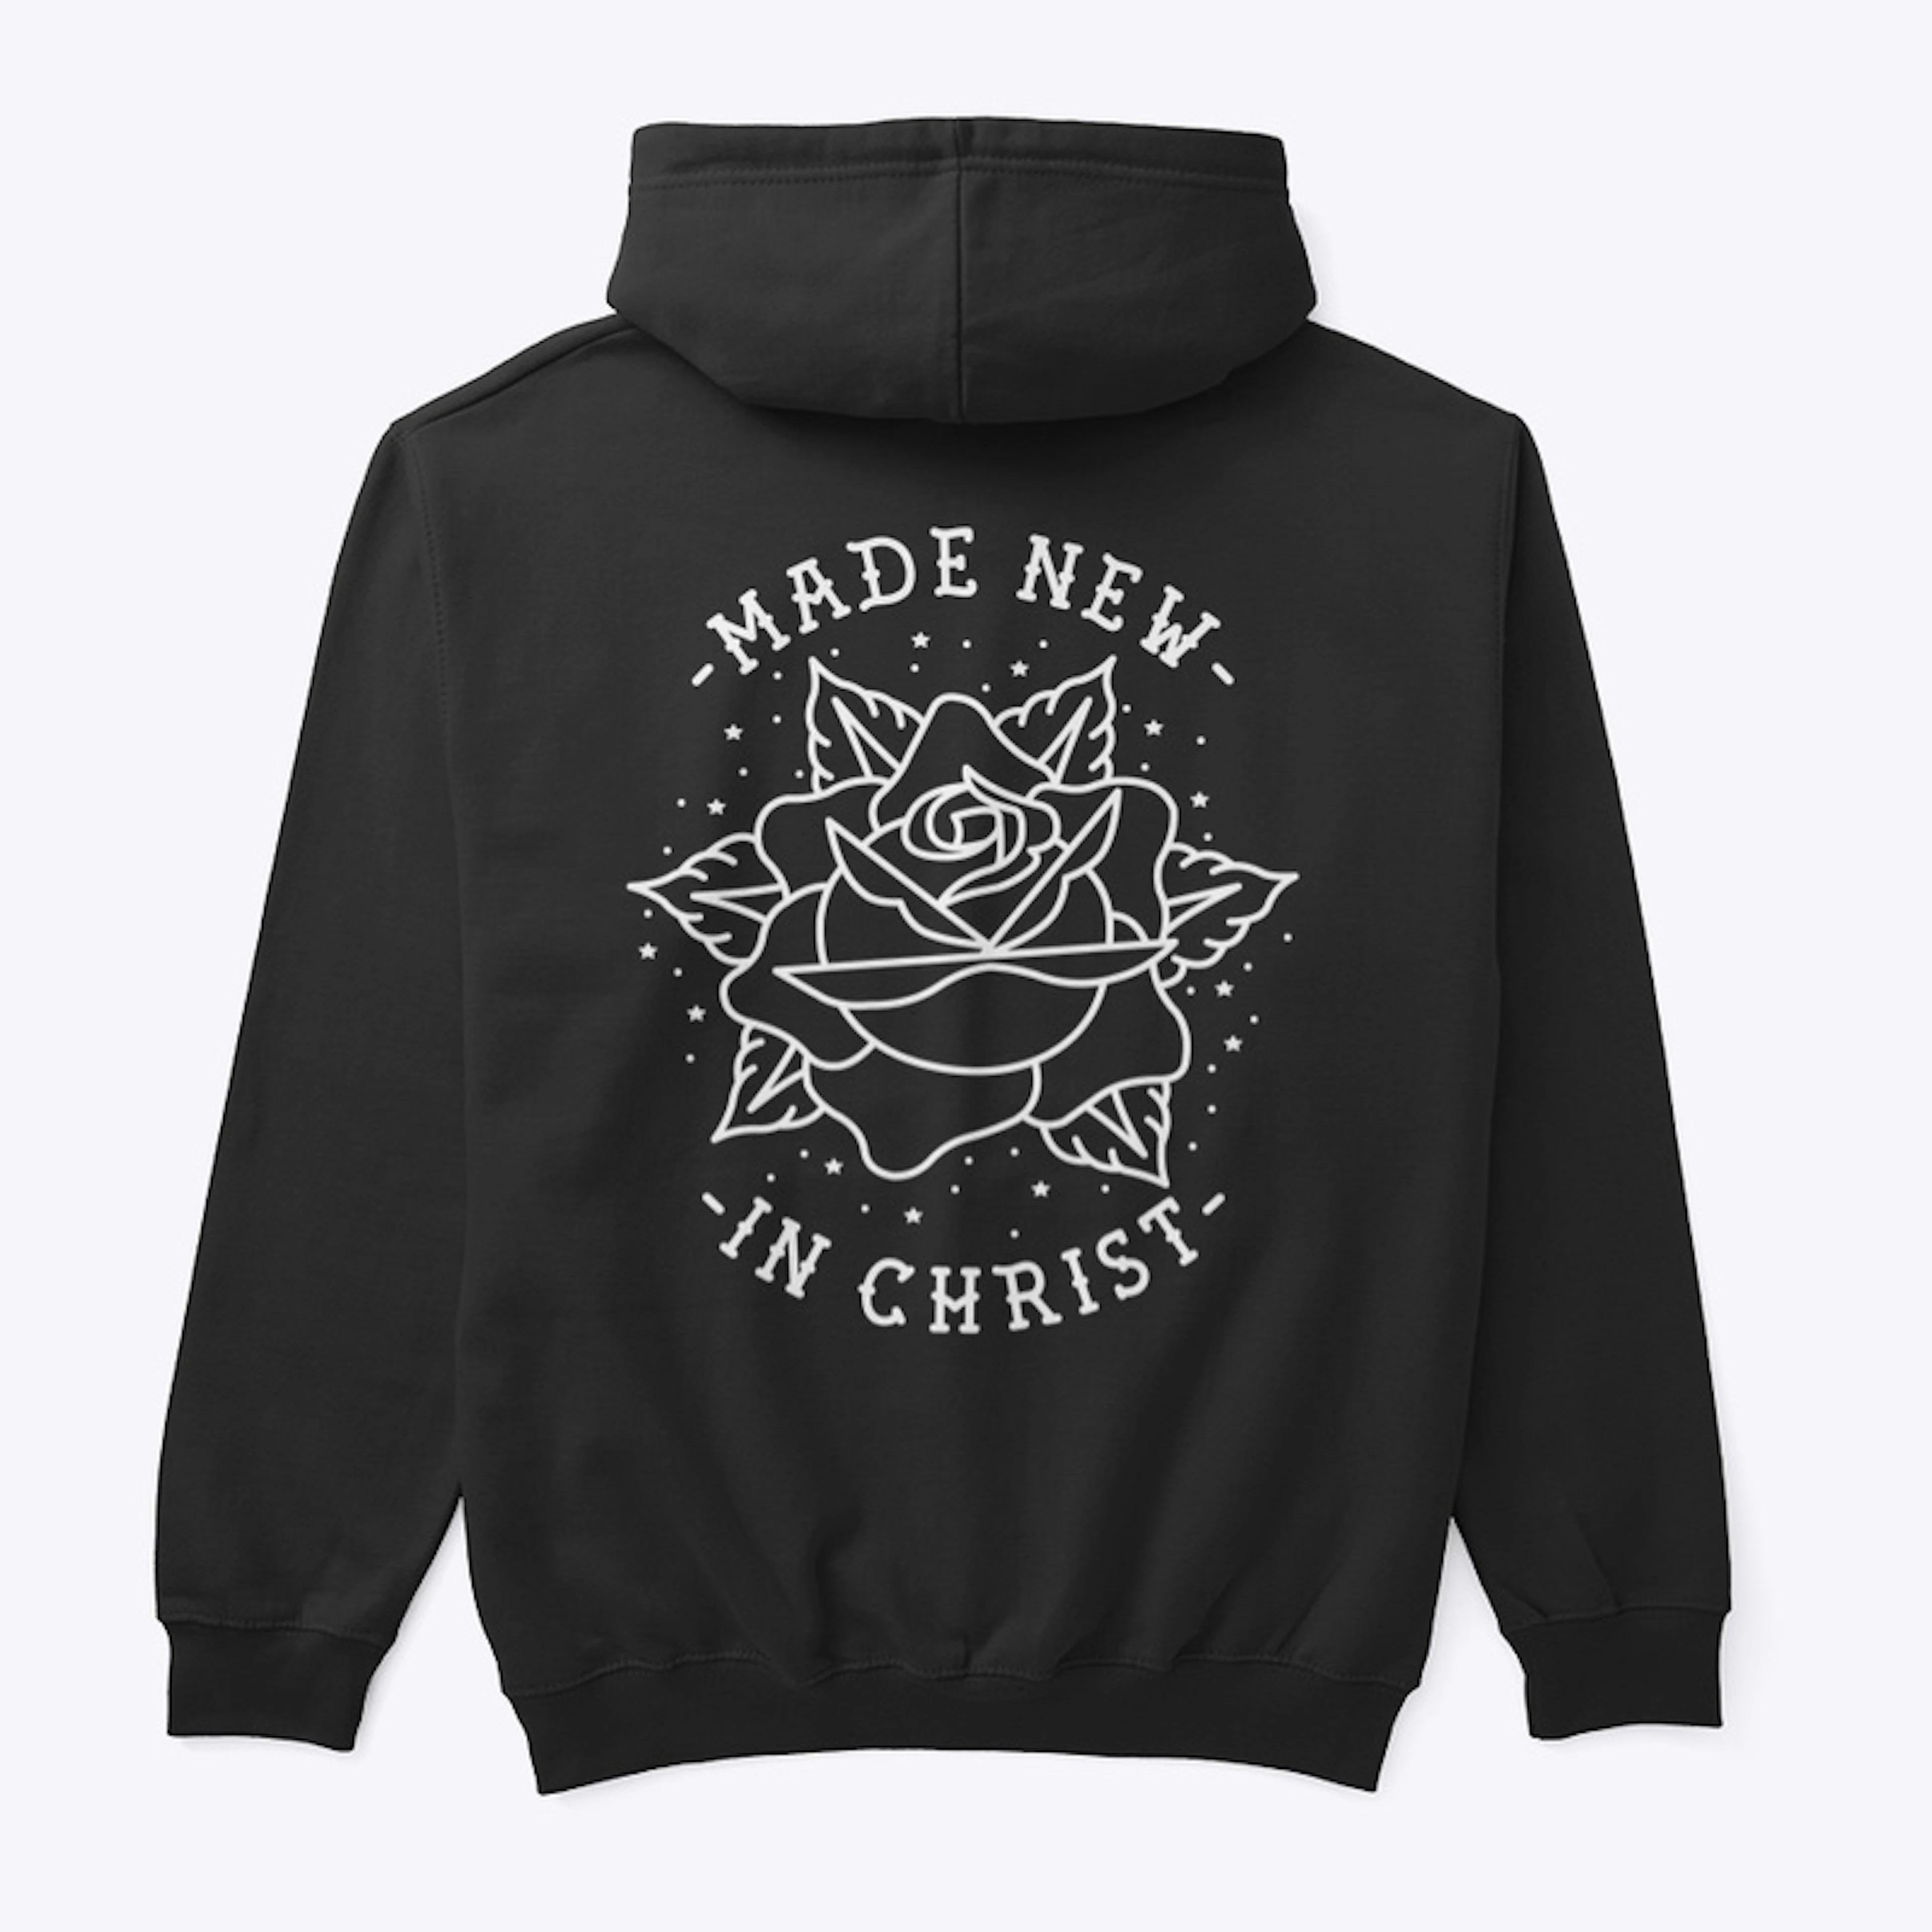 No Grave "Made New" Hoodie